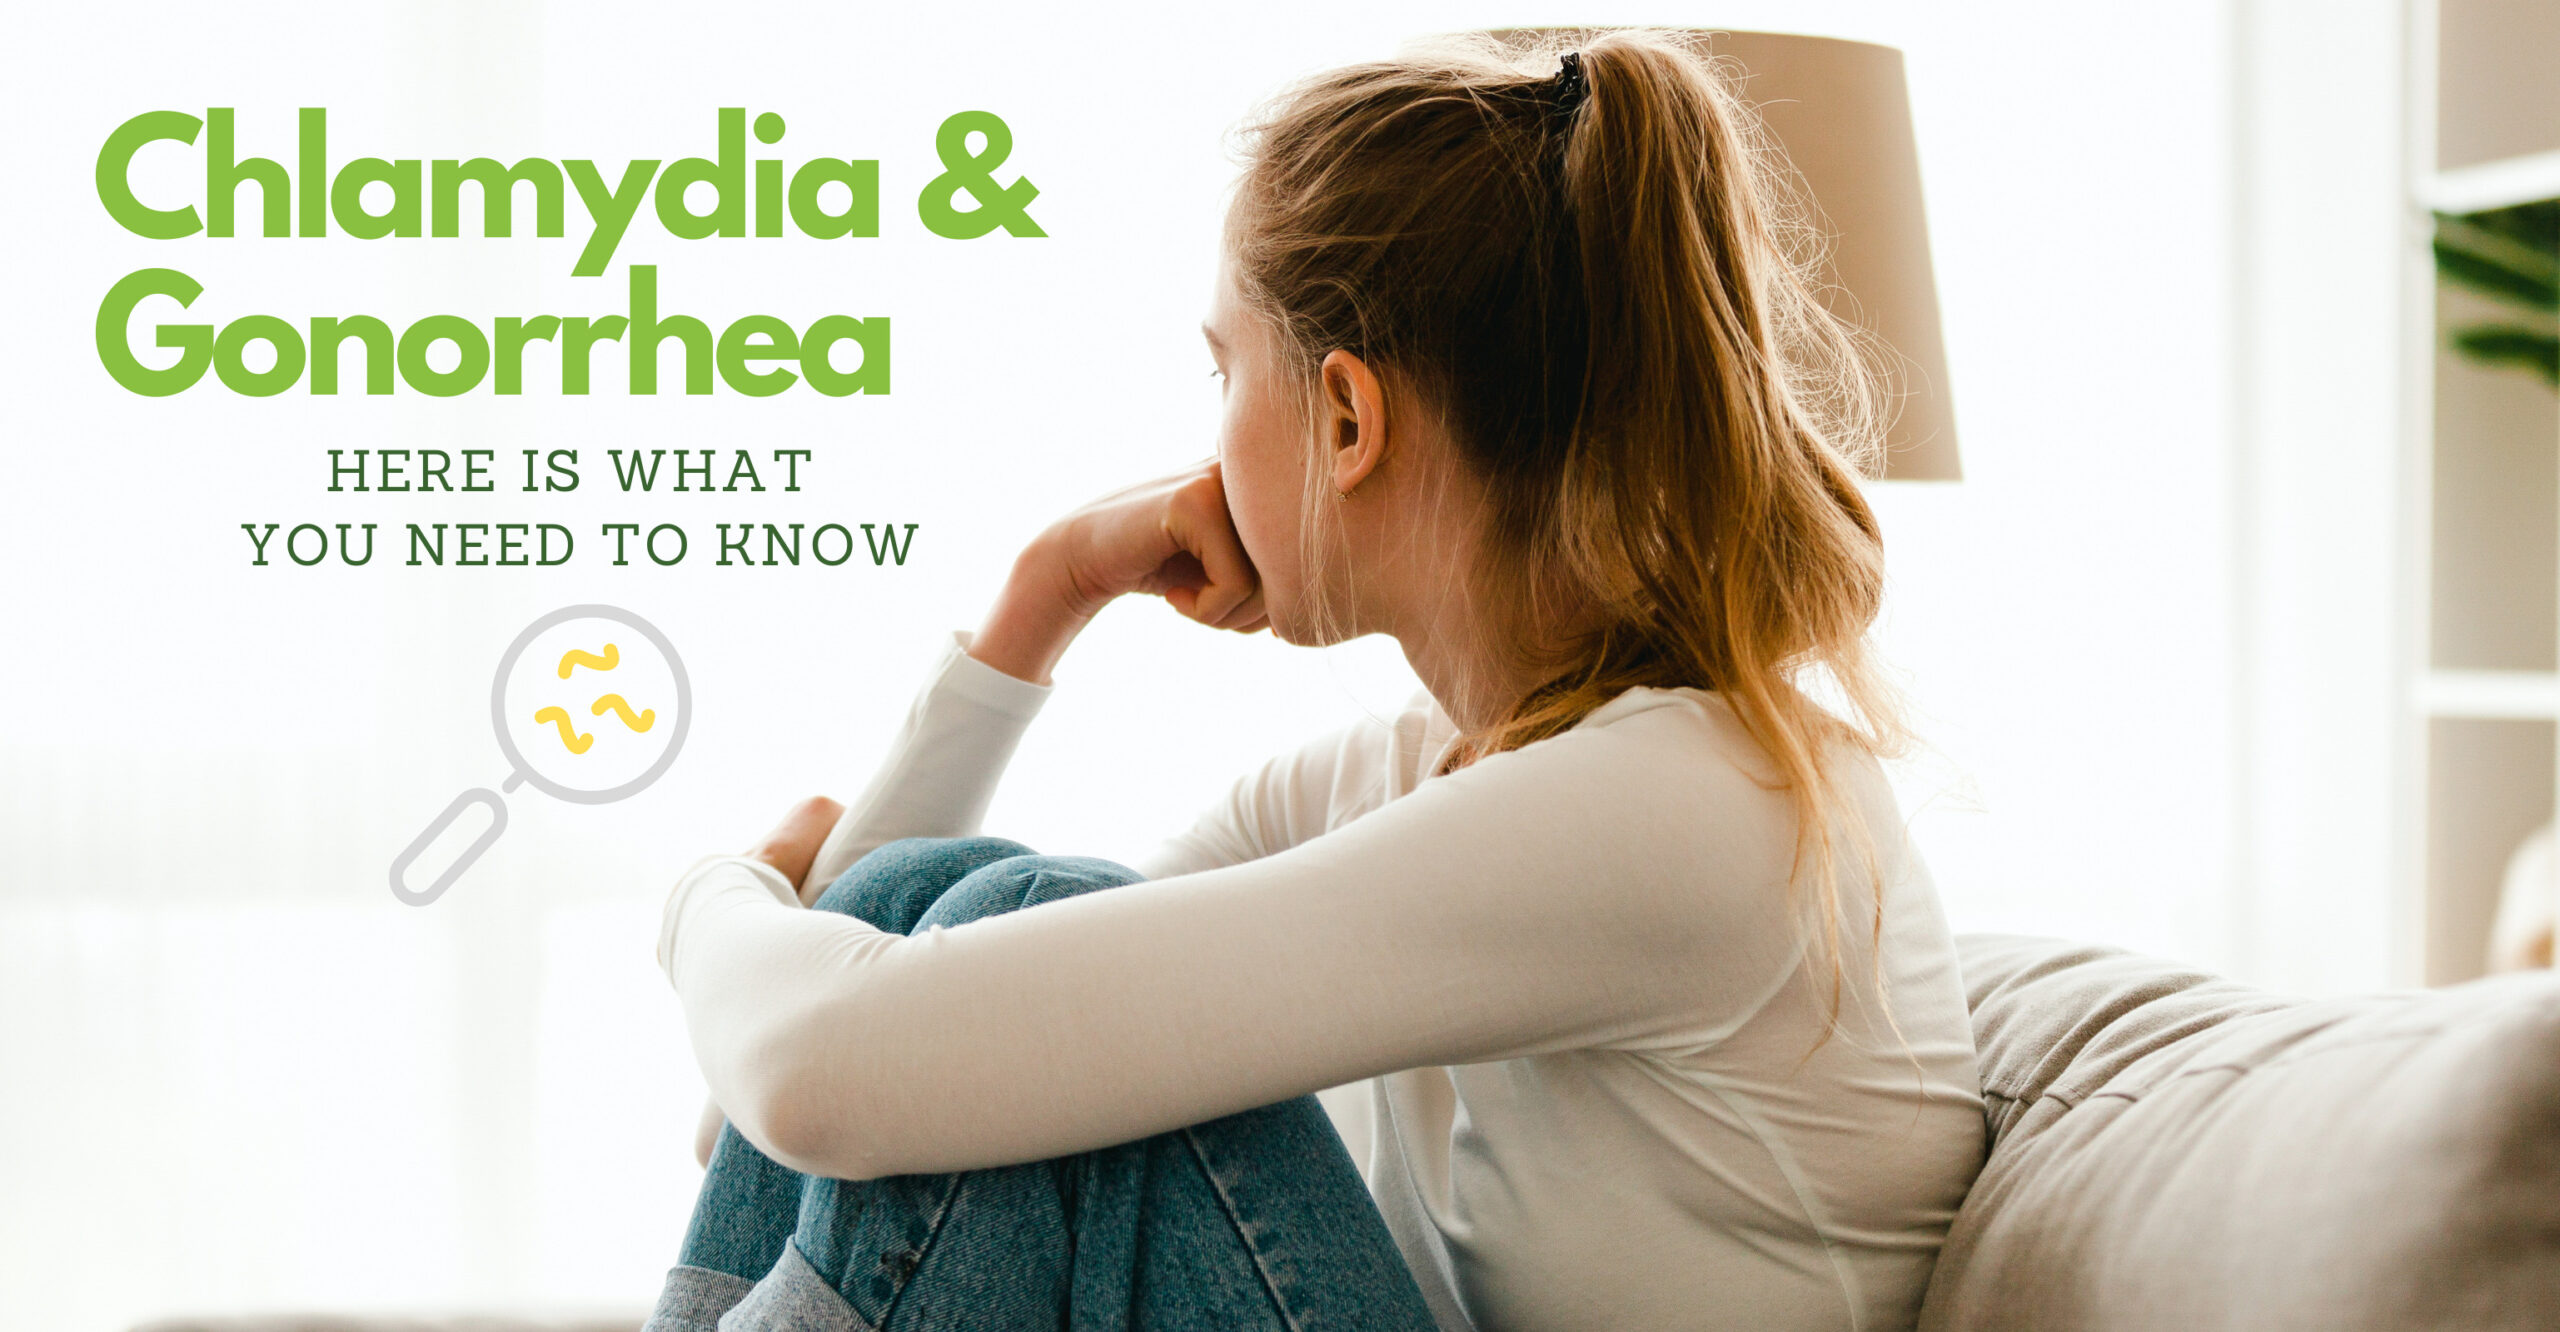 What you need to know about chlamydia and gonorrhea